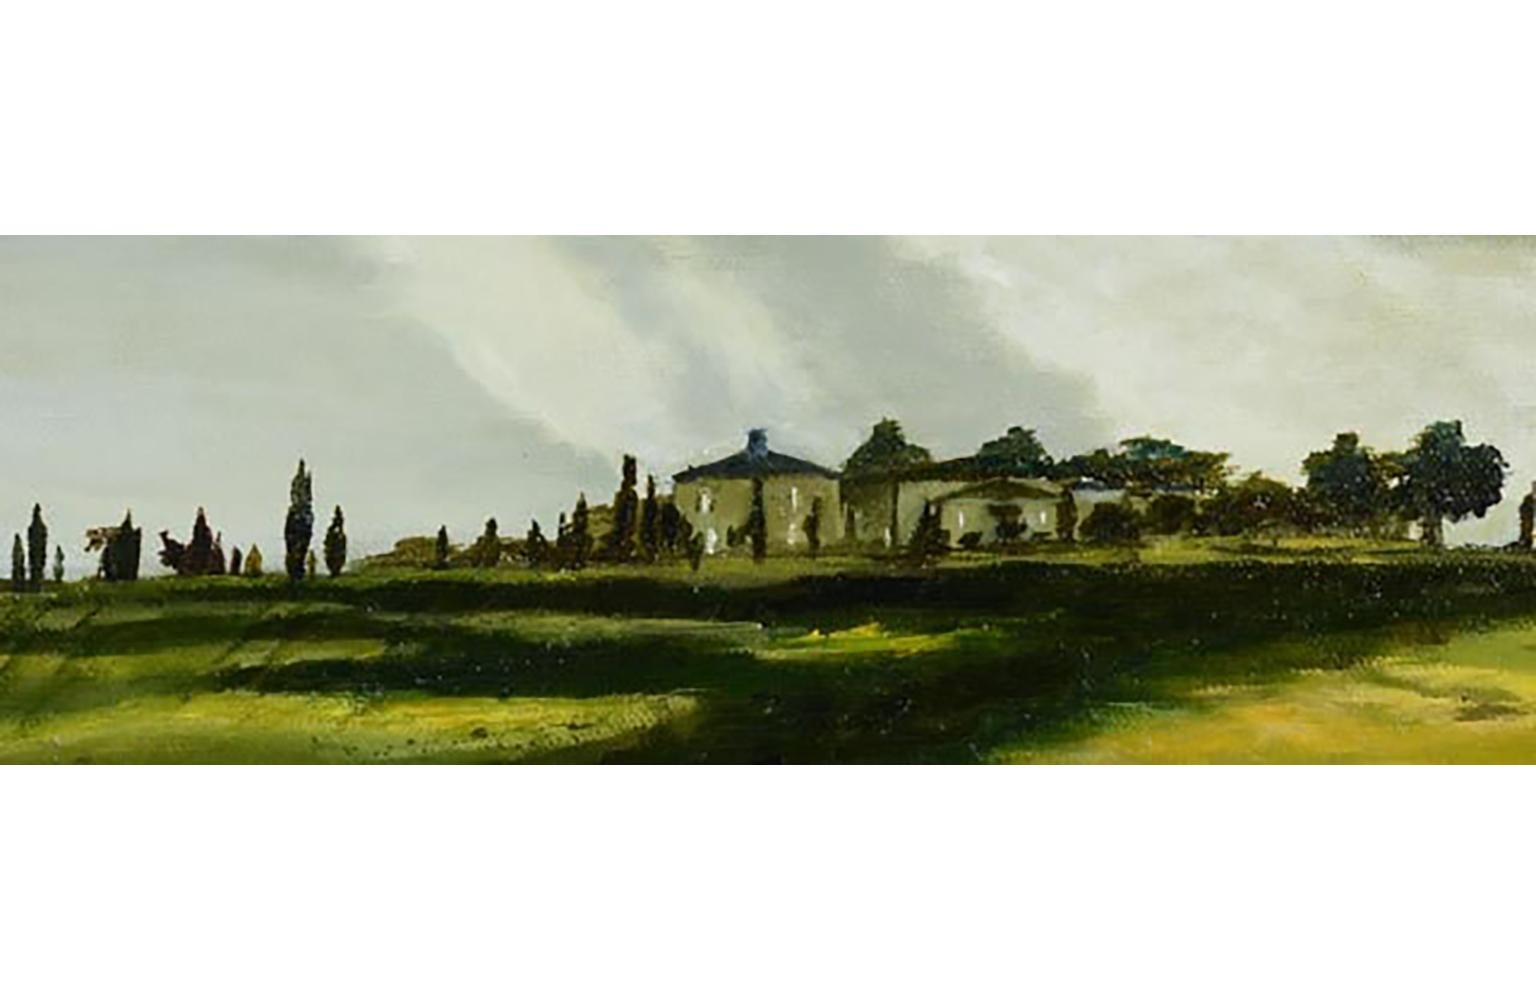 Landscape Oil Painting by Merrill Campbell  Oil on Canvas  Entitled Tuscan Landscape  Signed by the artist in the lower left corner of the canvas “Merrill Campbell”  Housed in a Stained Mahogany Wood Frame with gold trim  Measures approx. 24.25″ H x